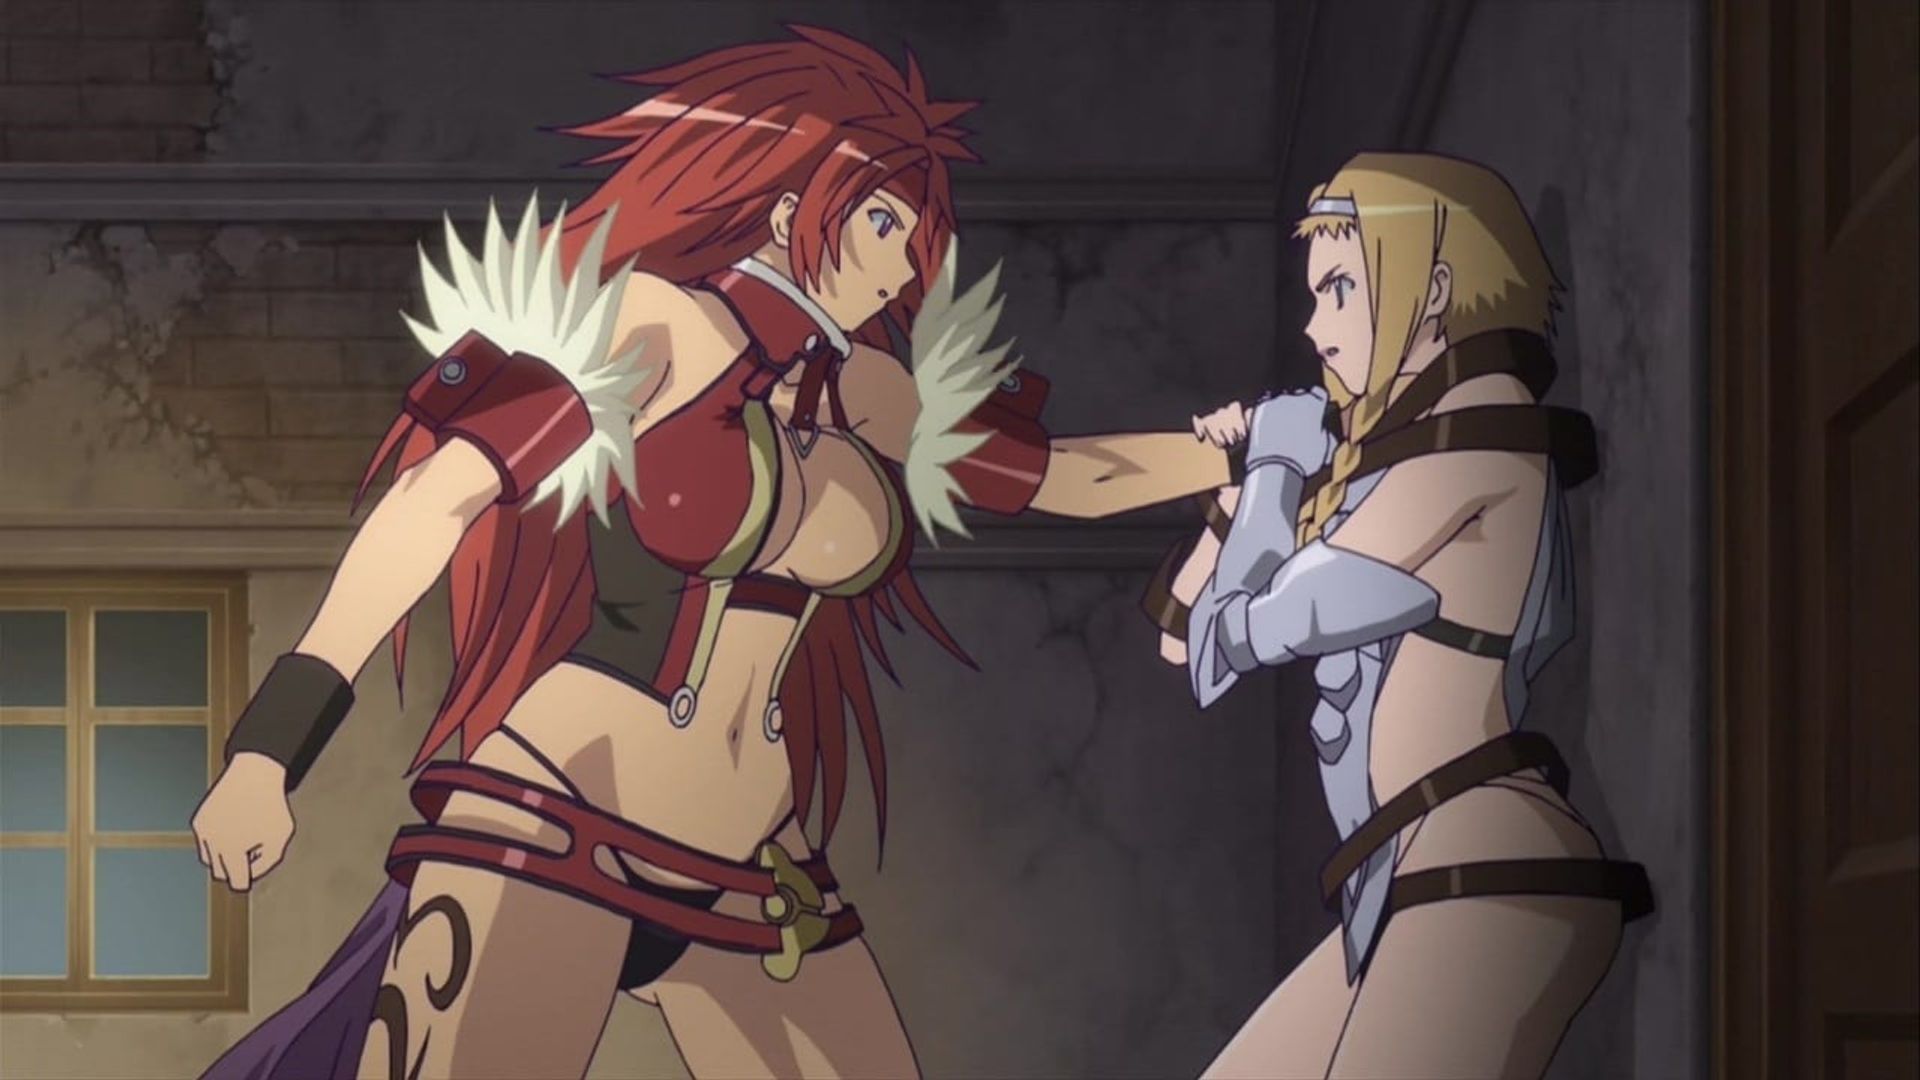 Queen's Blade: The Exiled Virgin background